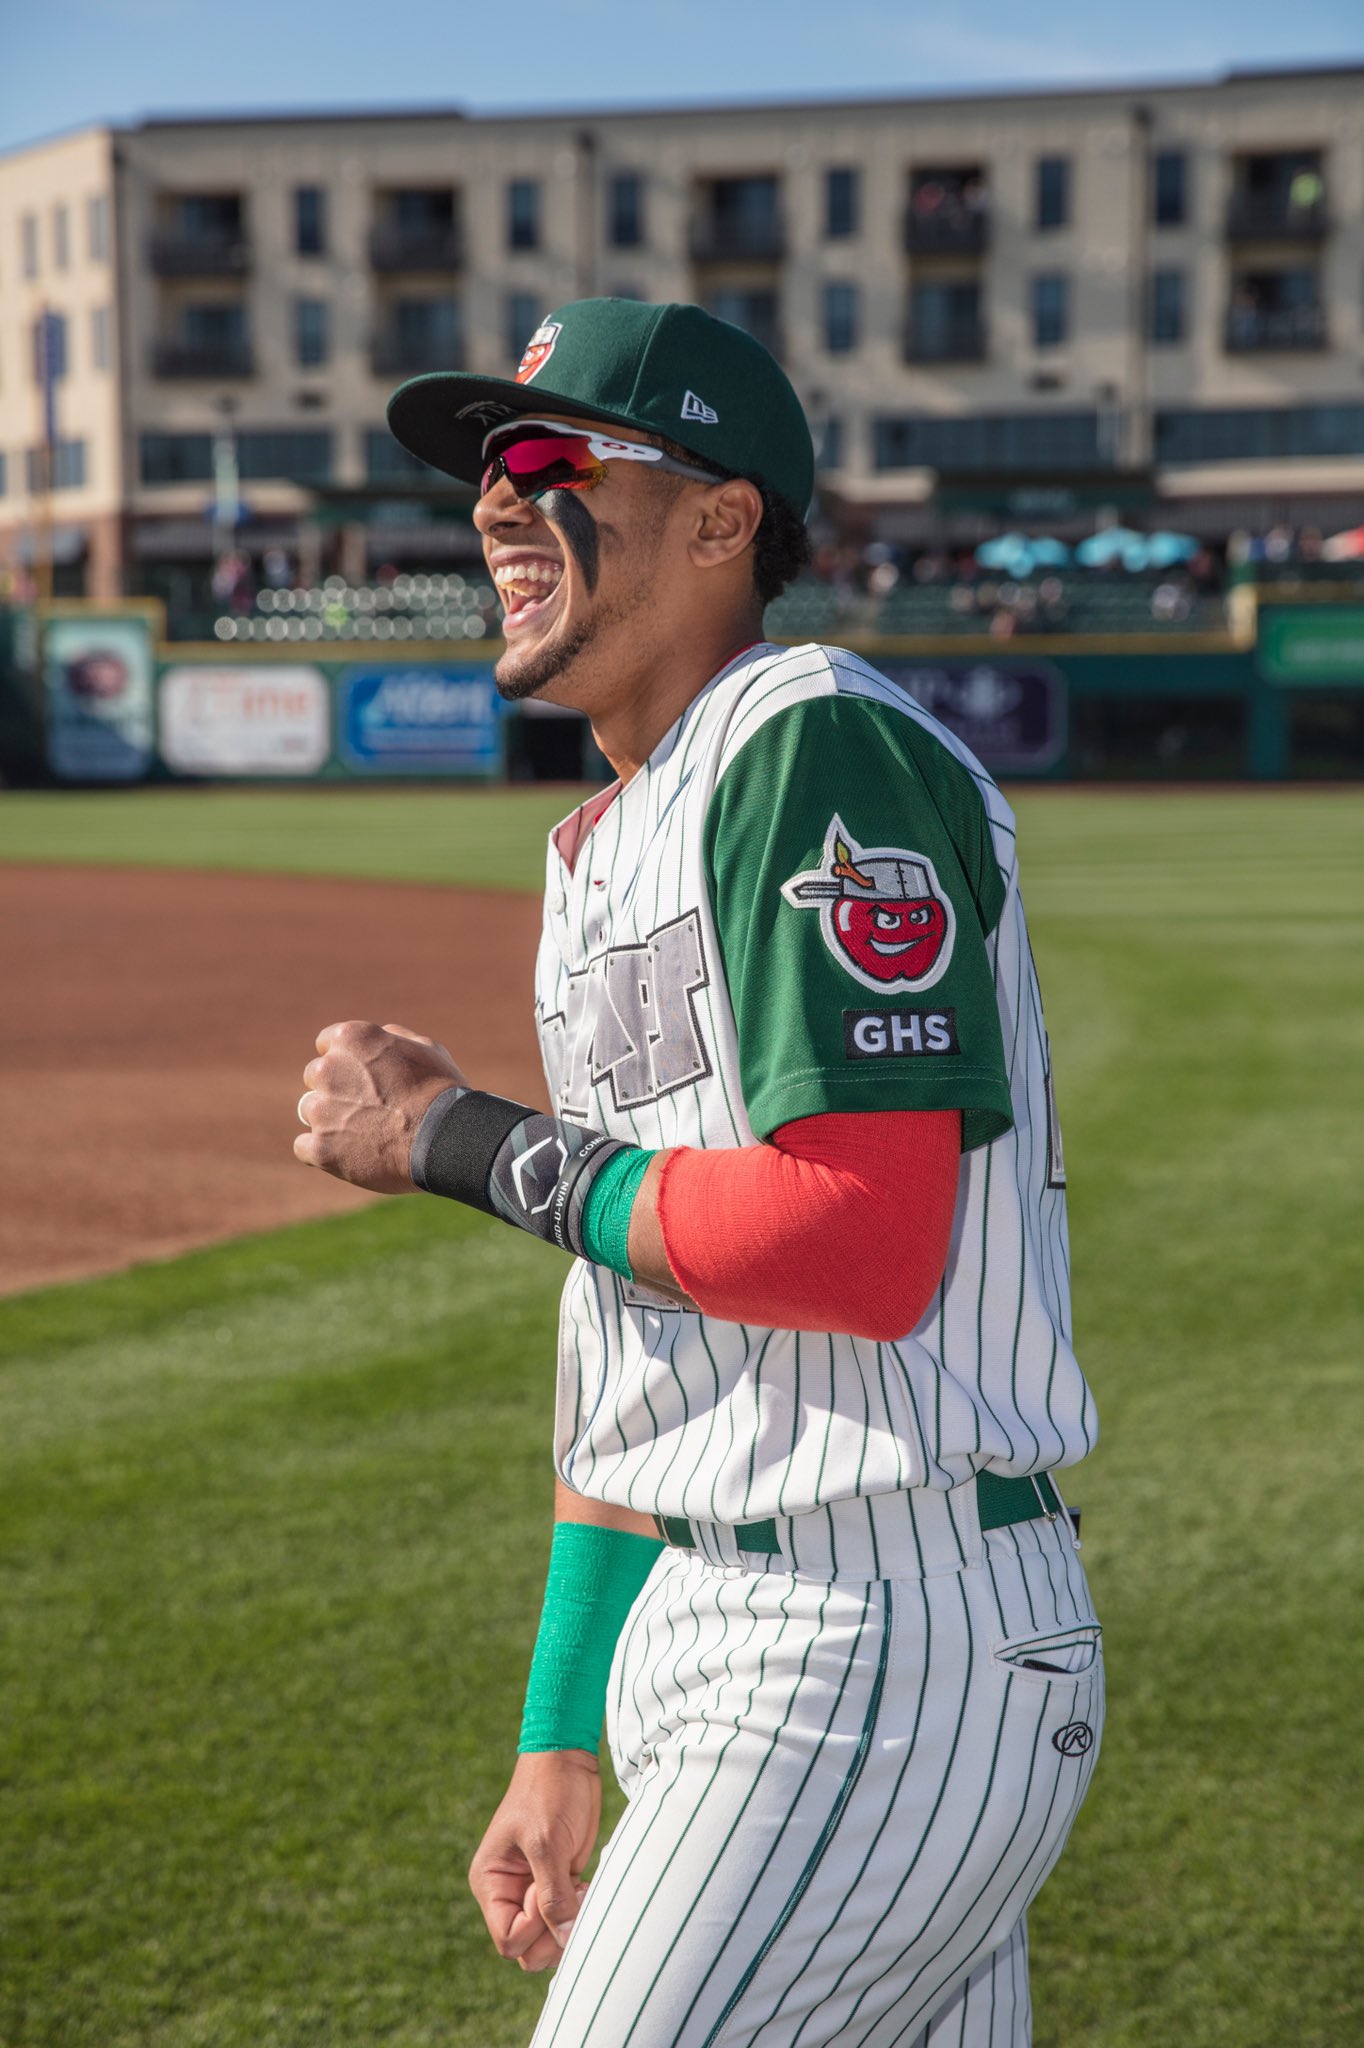 Fort Wayne TinCaps on Twitter: 1️⃣ more year 'till he can match the amount  of HRs he hit with us in 2017! 😏💪 Happy 2️⃣0️⃣th birthday Fernando! 🎂🎉   / Twitter